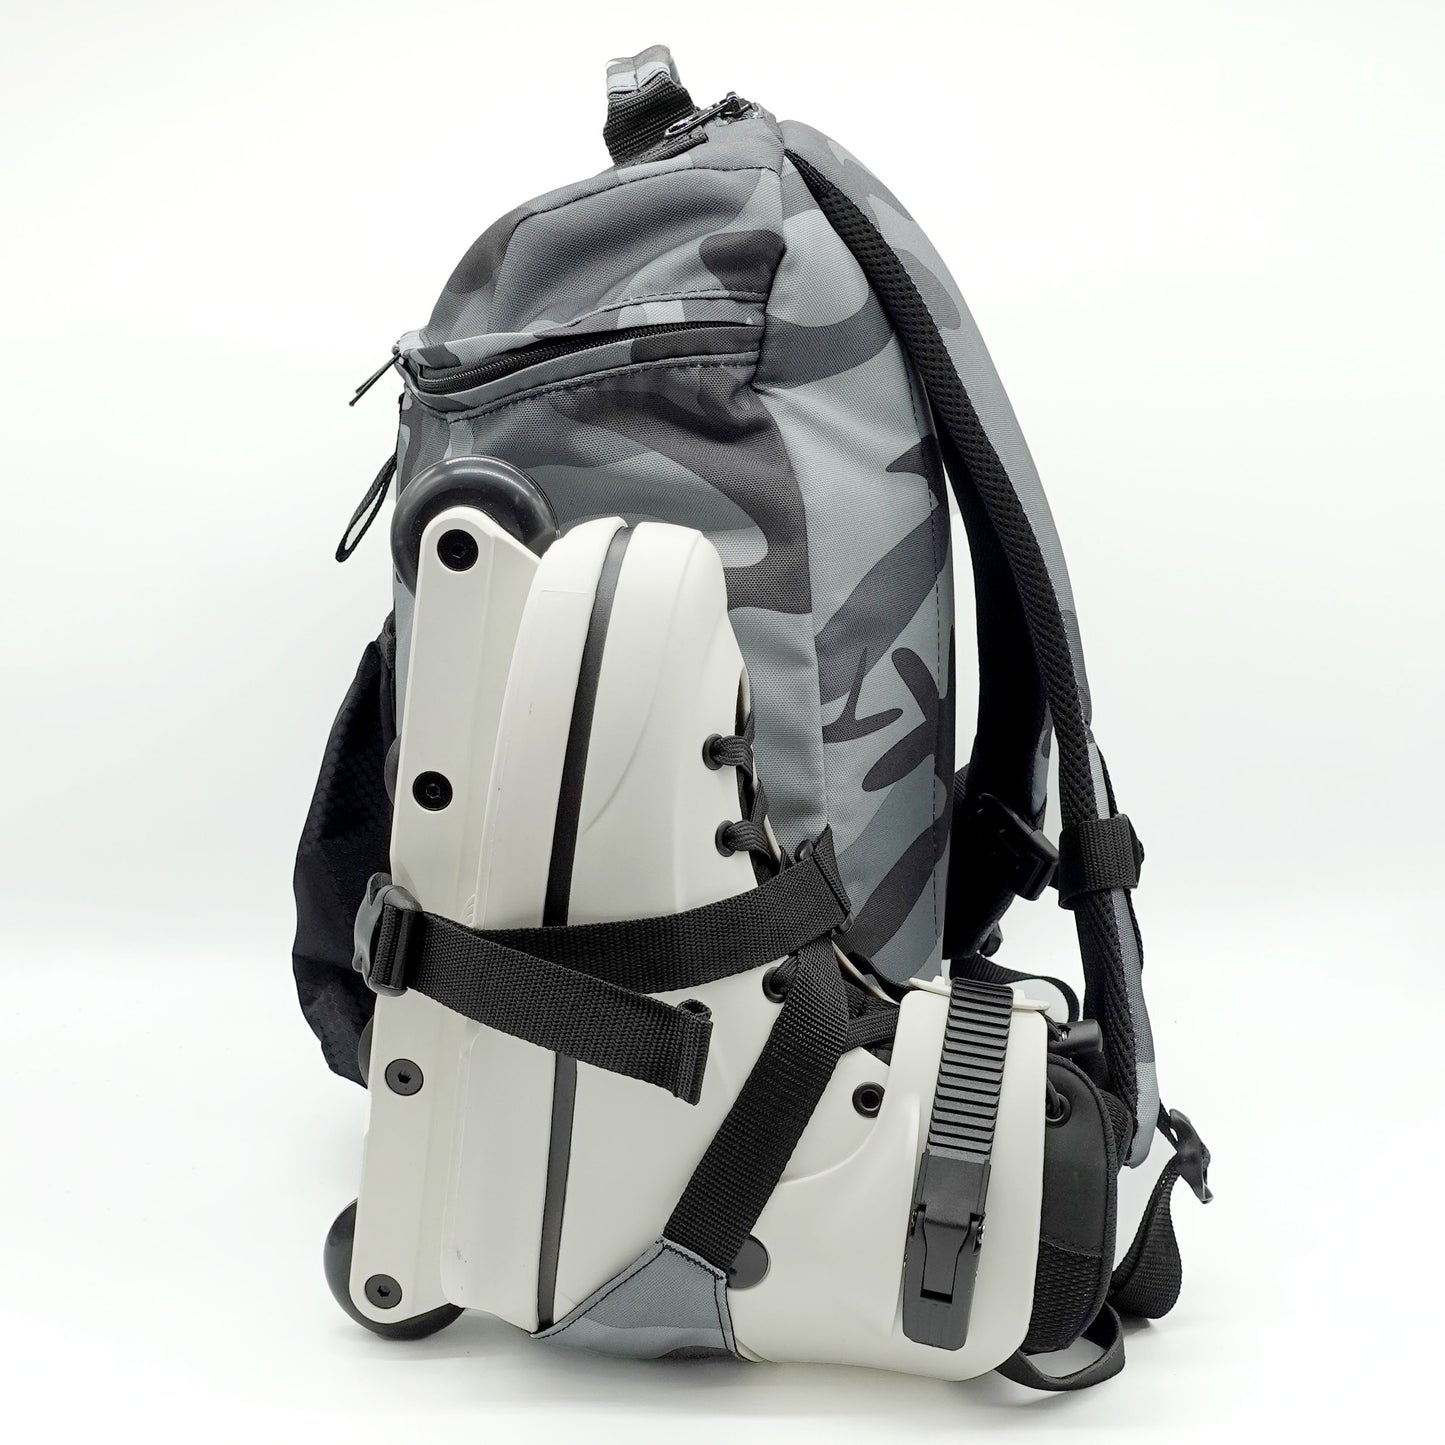 50/50 Session Backpack (Grey Camo)